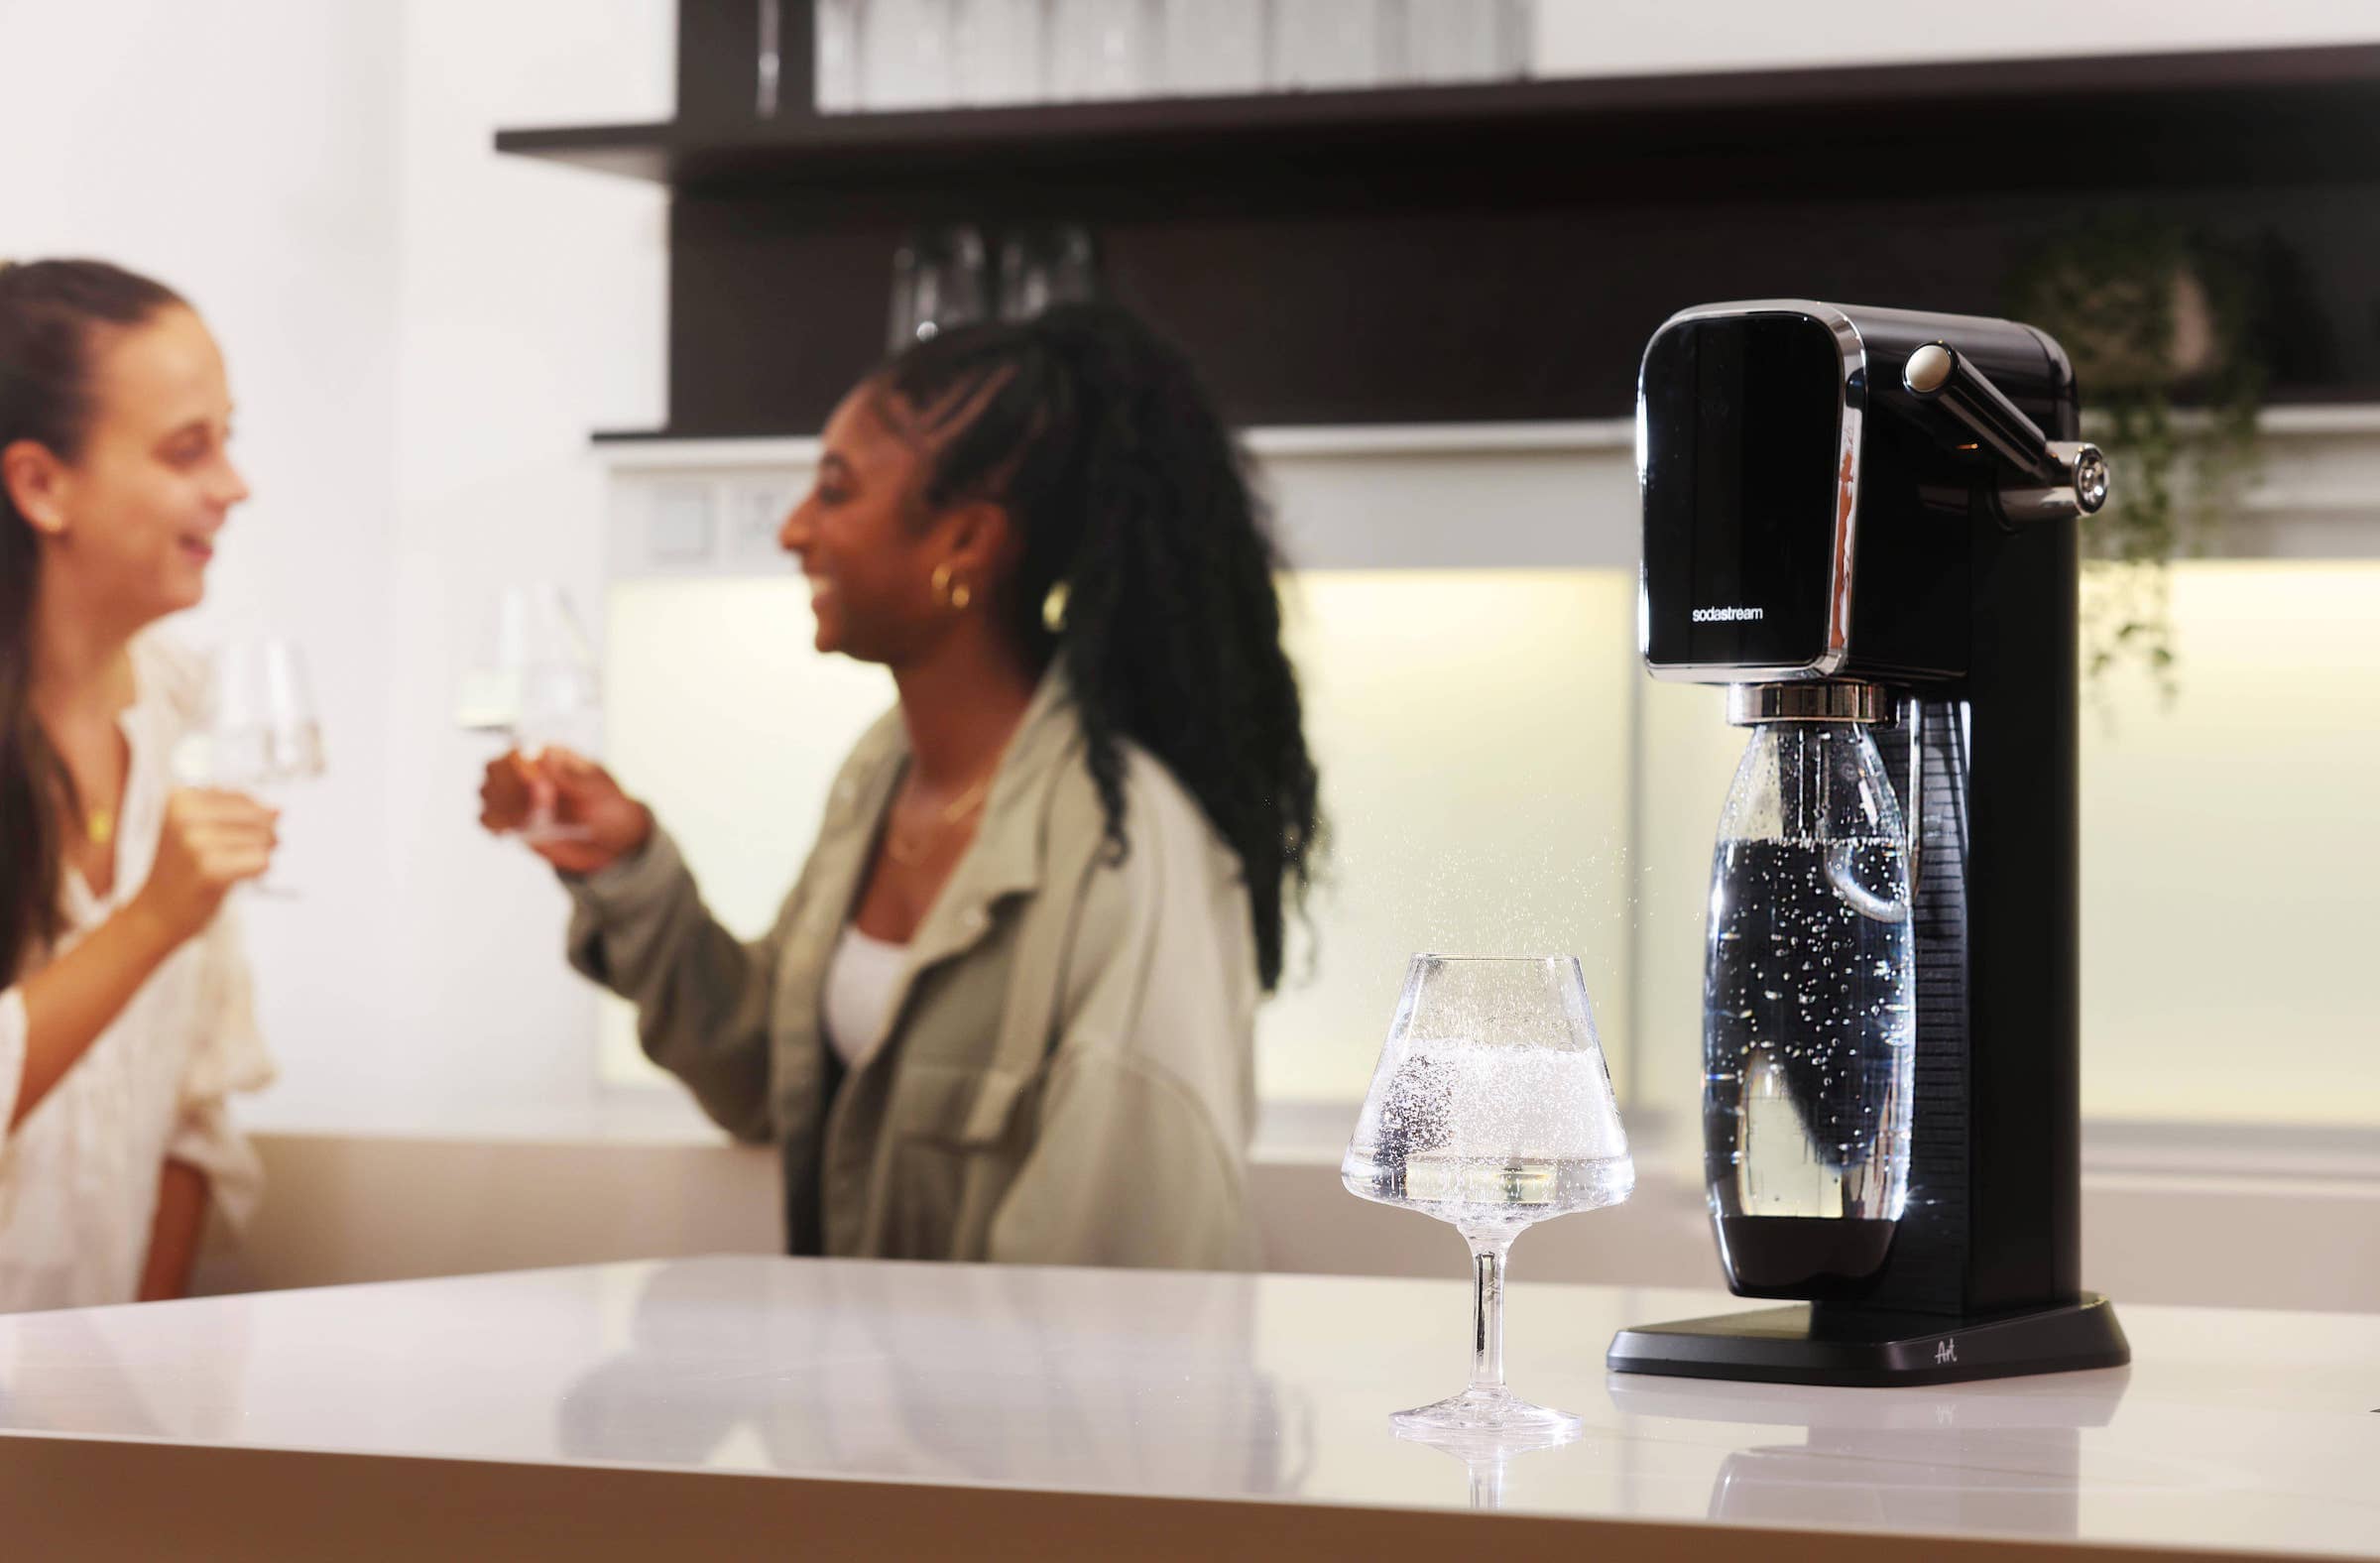 Sodastream creates the world’s ultimate sparkling water glass